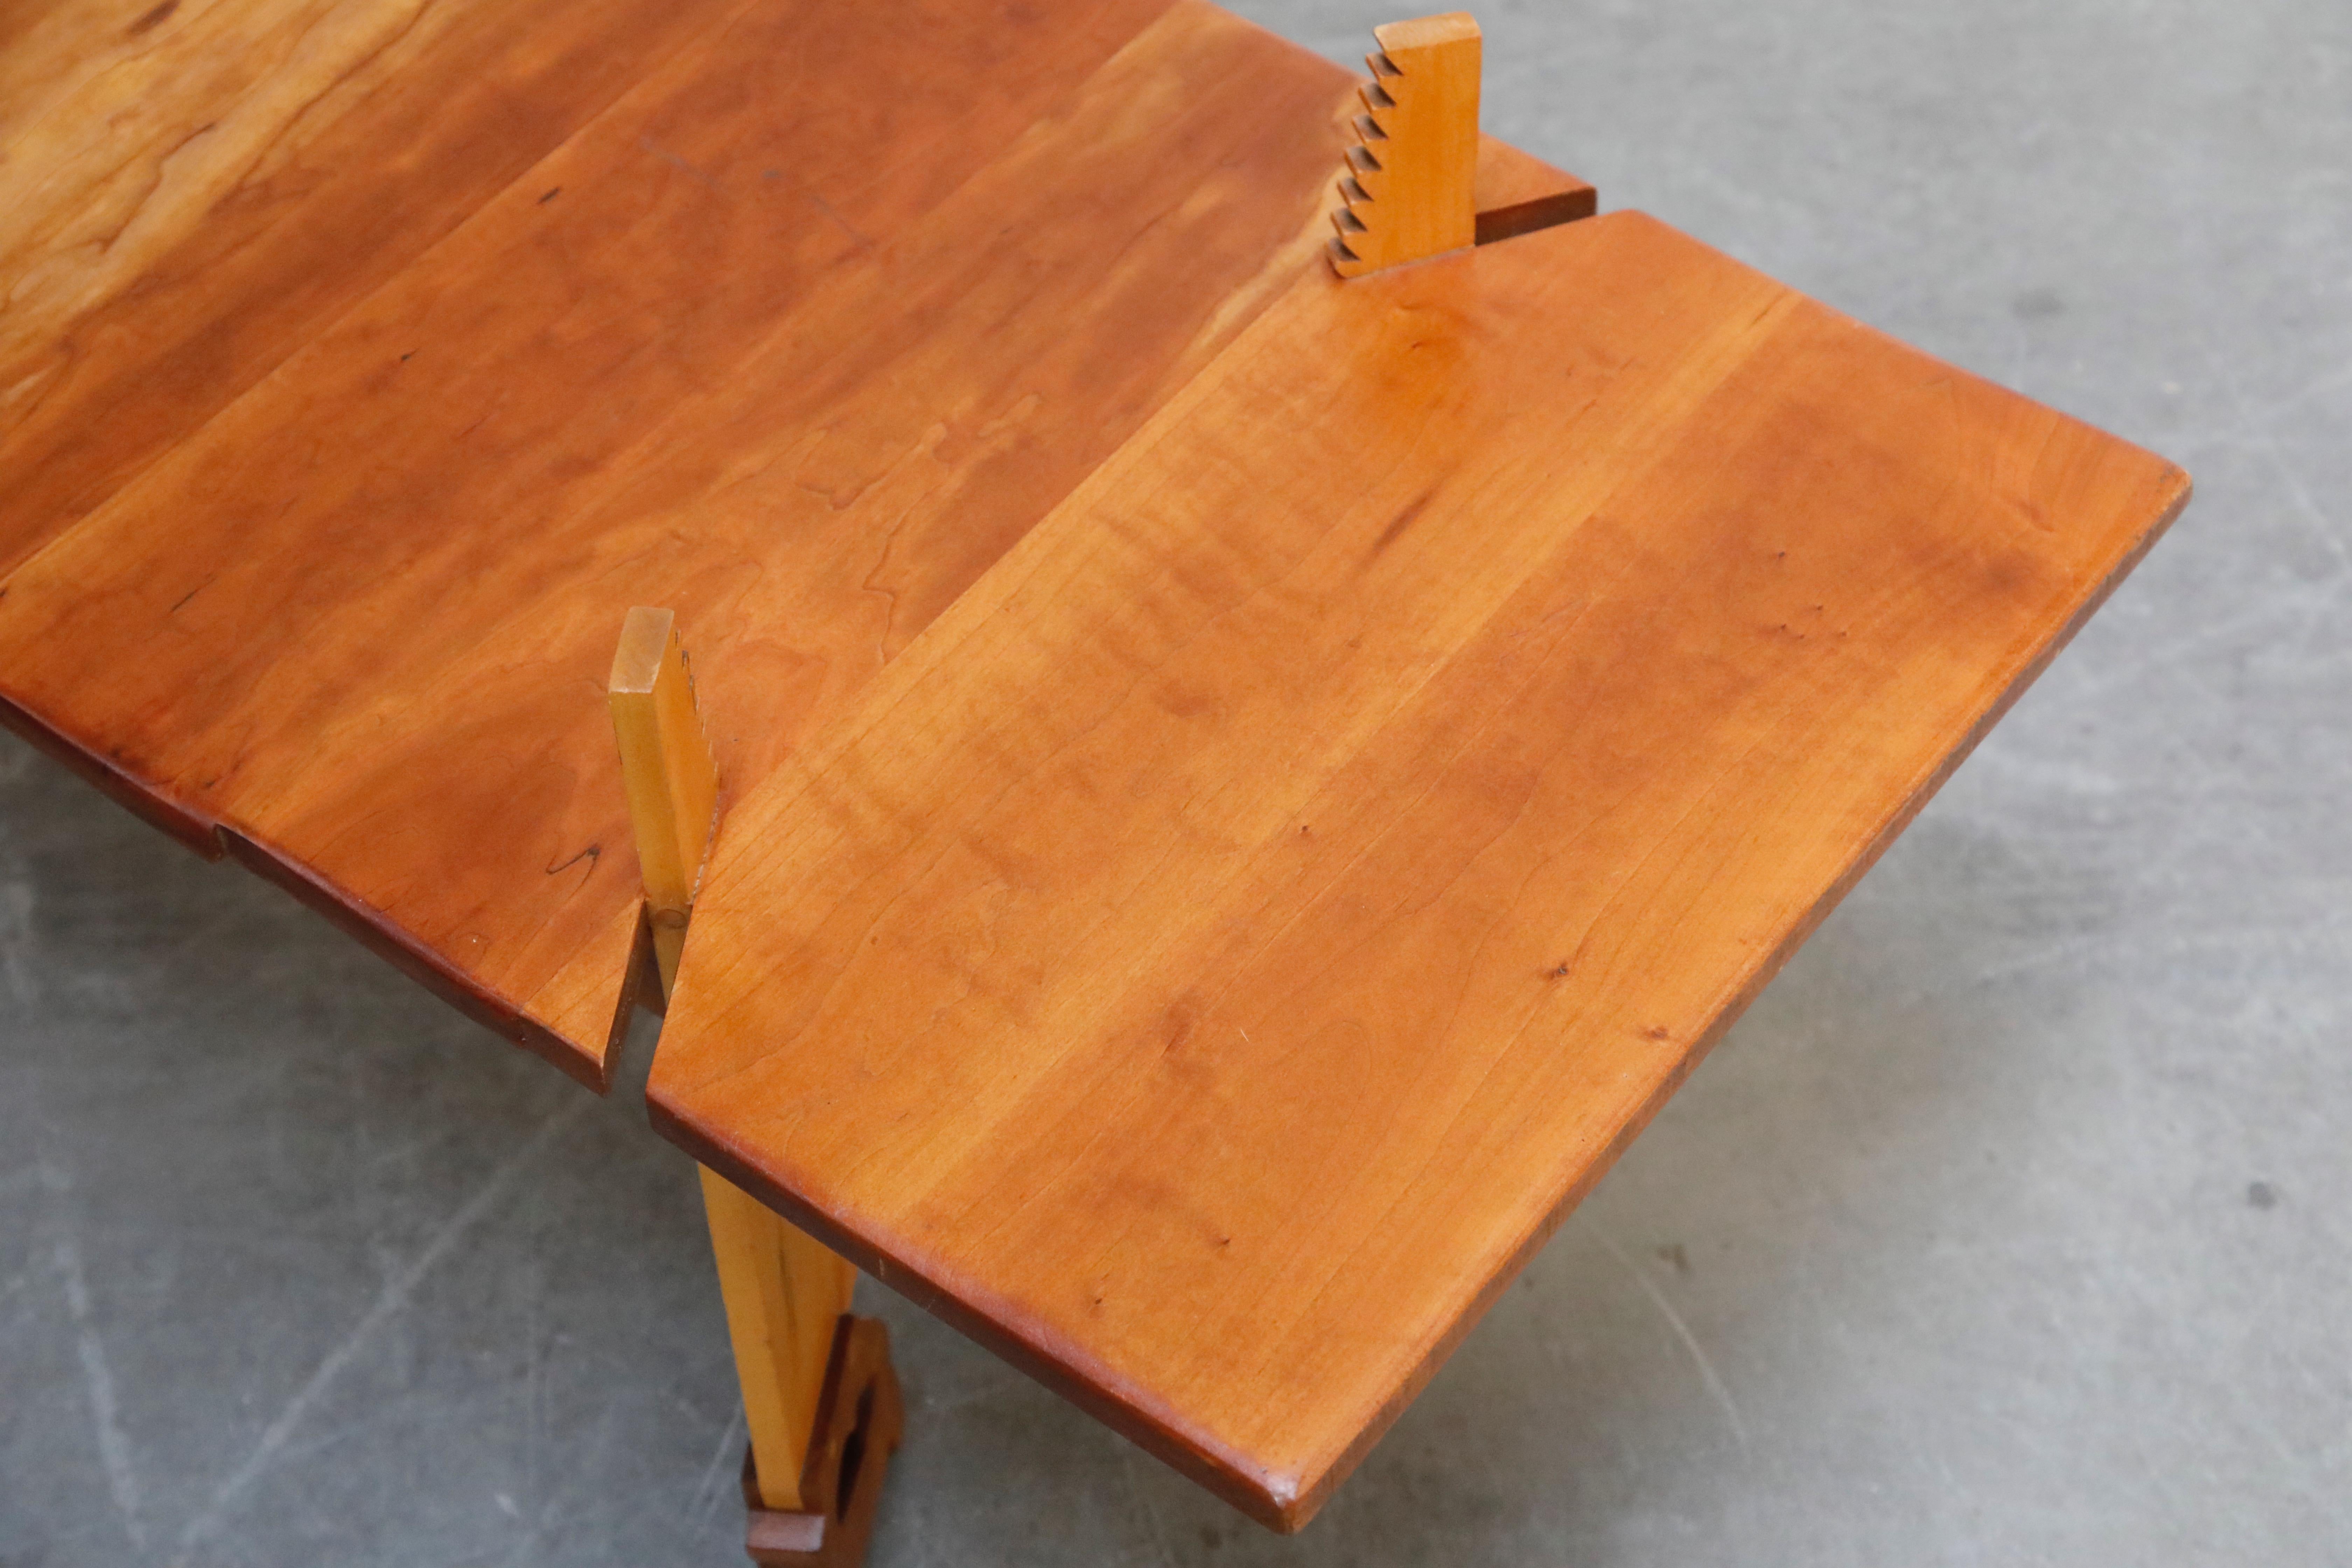 Whimsical Post-Modern Craftsman Faux-Saw Coffee Table 11